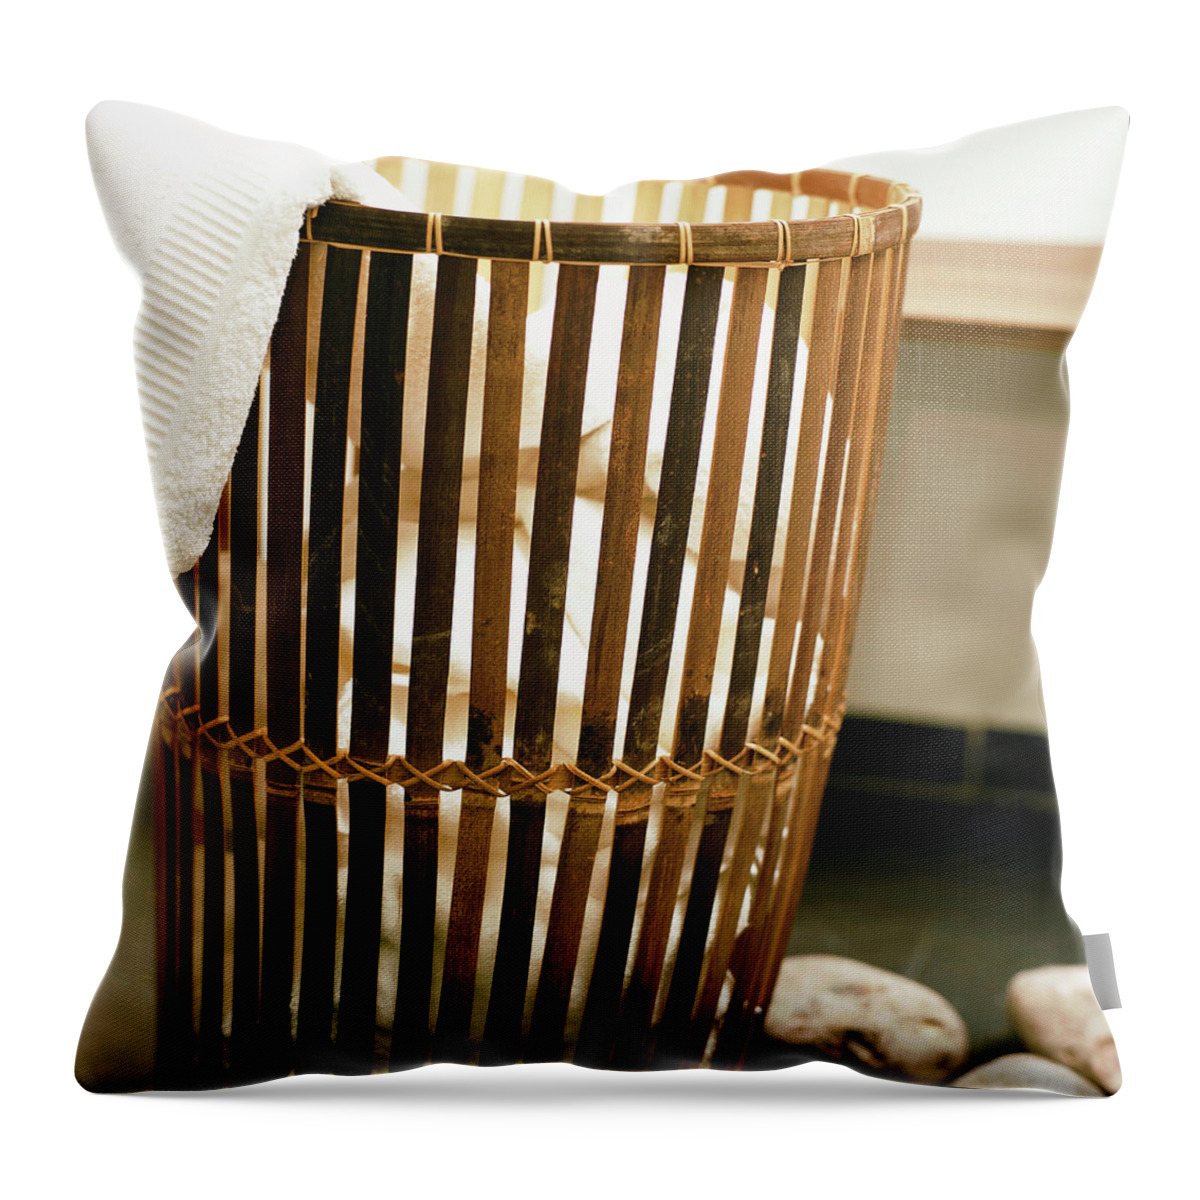 Ip_00343846 Throw Pillow featuring the photograph Towels In Laundry Basket by Luc Wauman